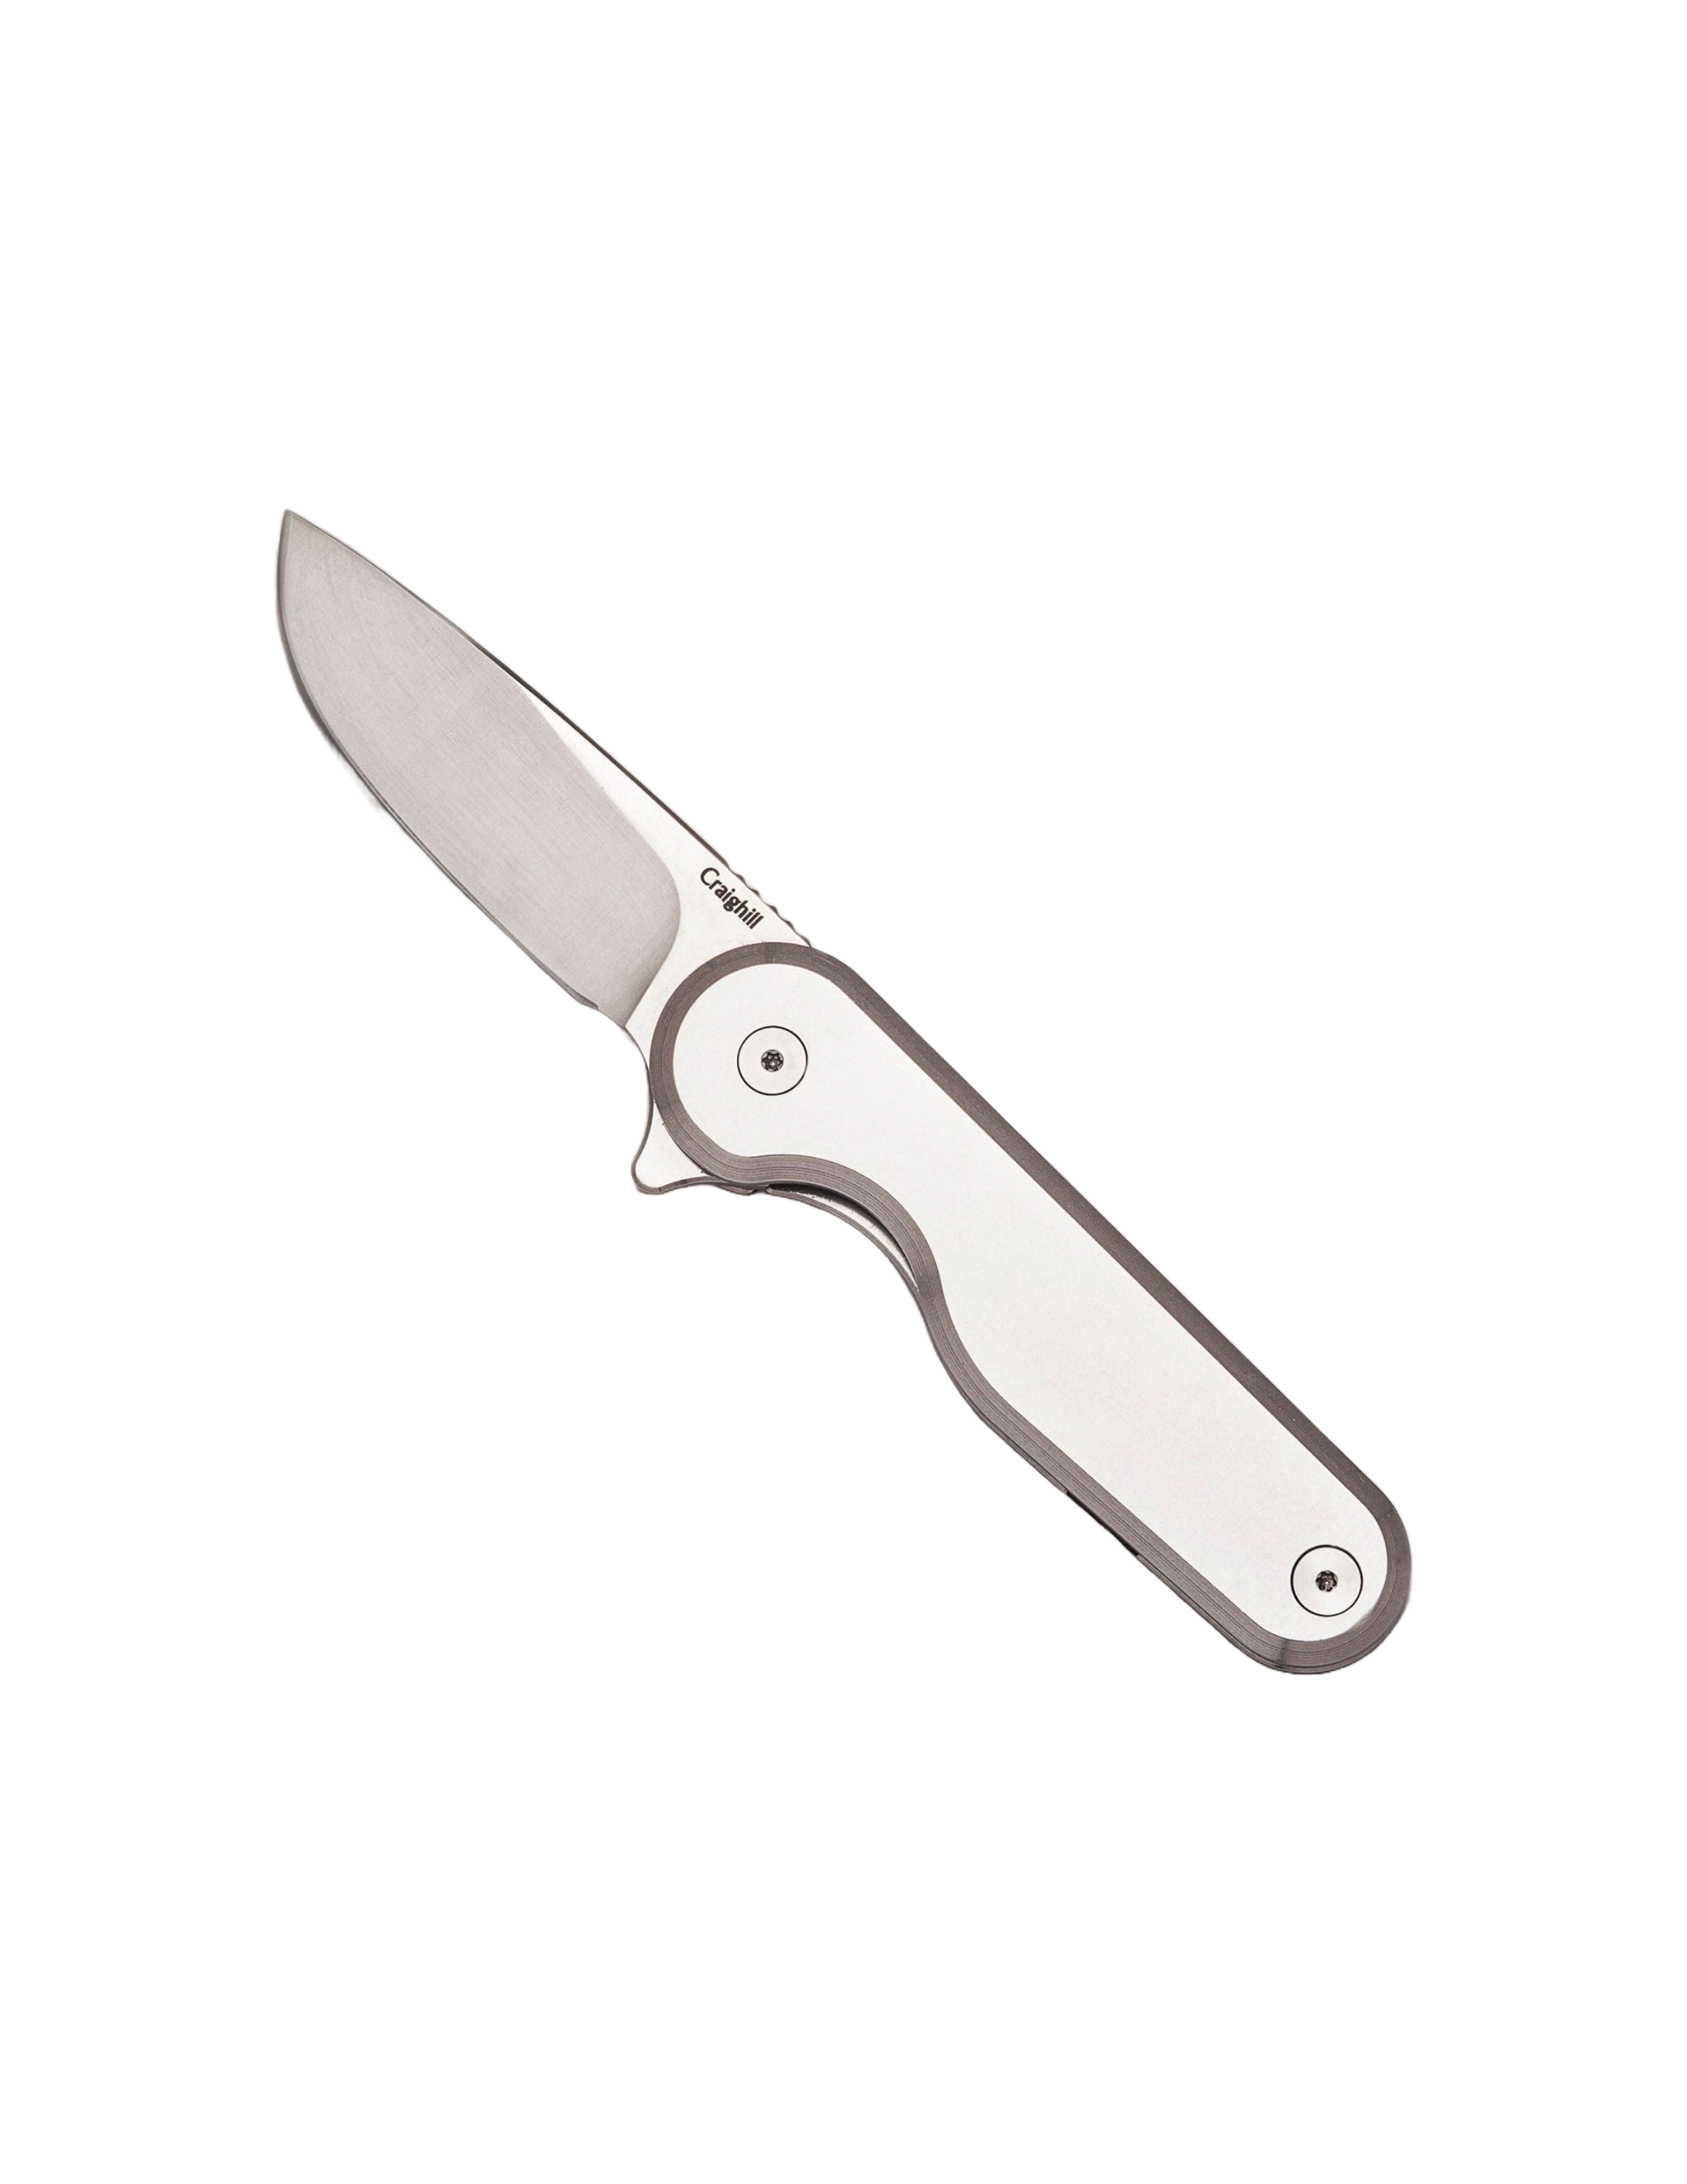 Rook Knife - Stainless Steel